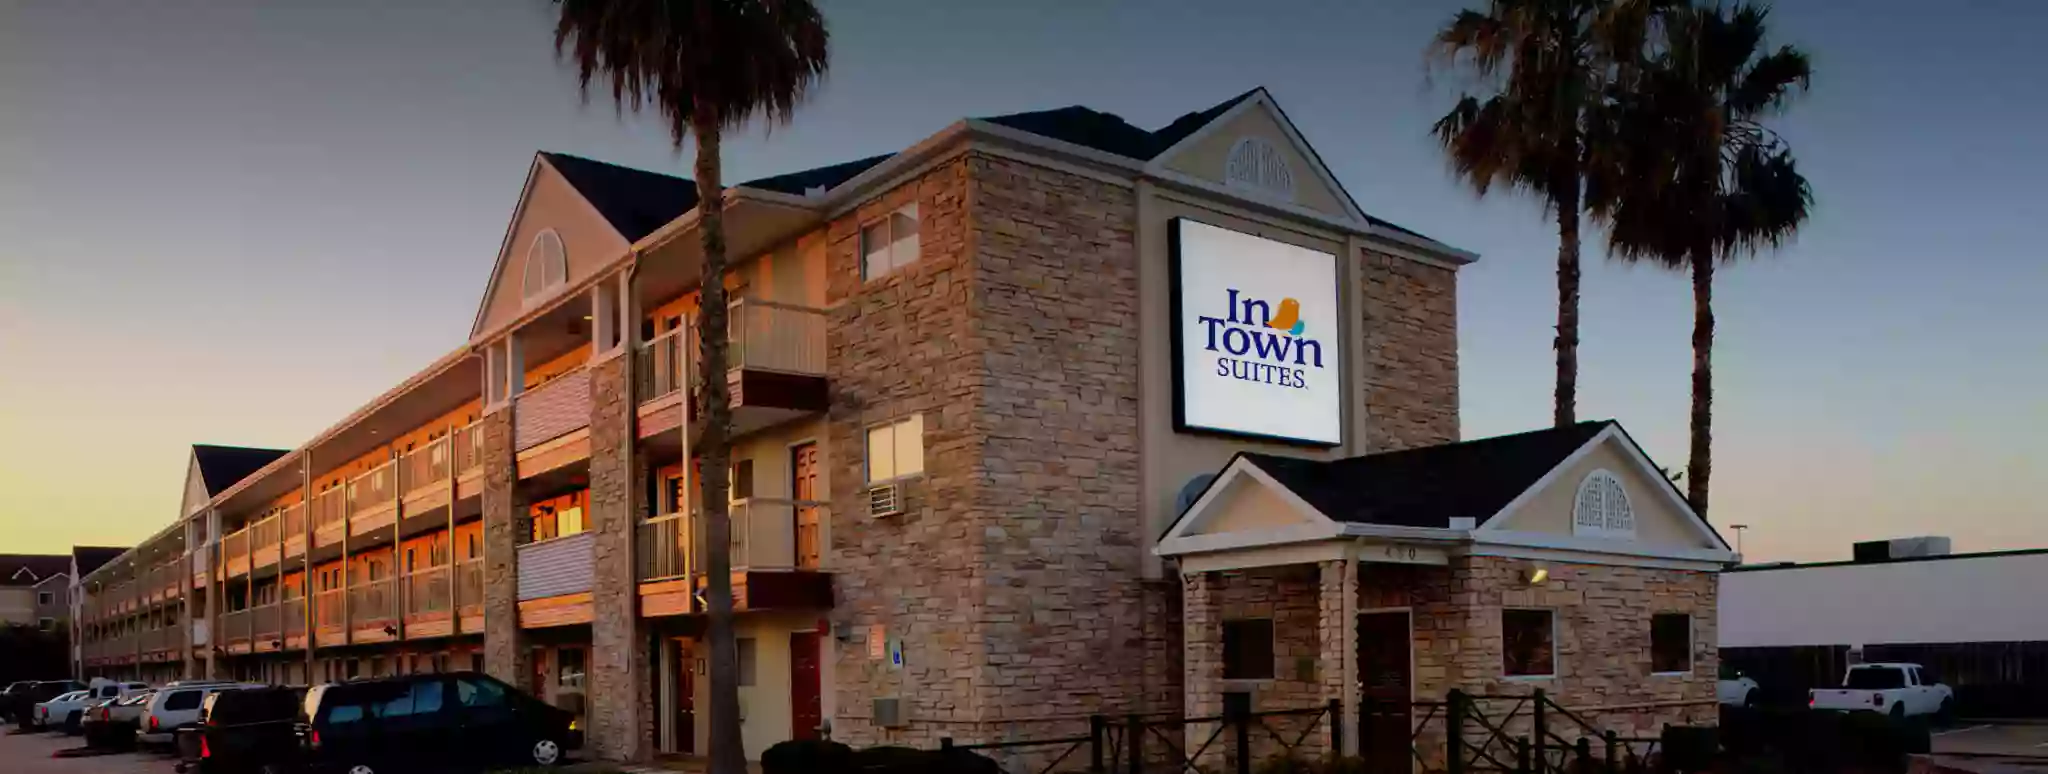 InTown Suites Extended Stay Houston TX - Stuebner Airline Road